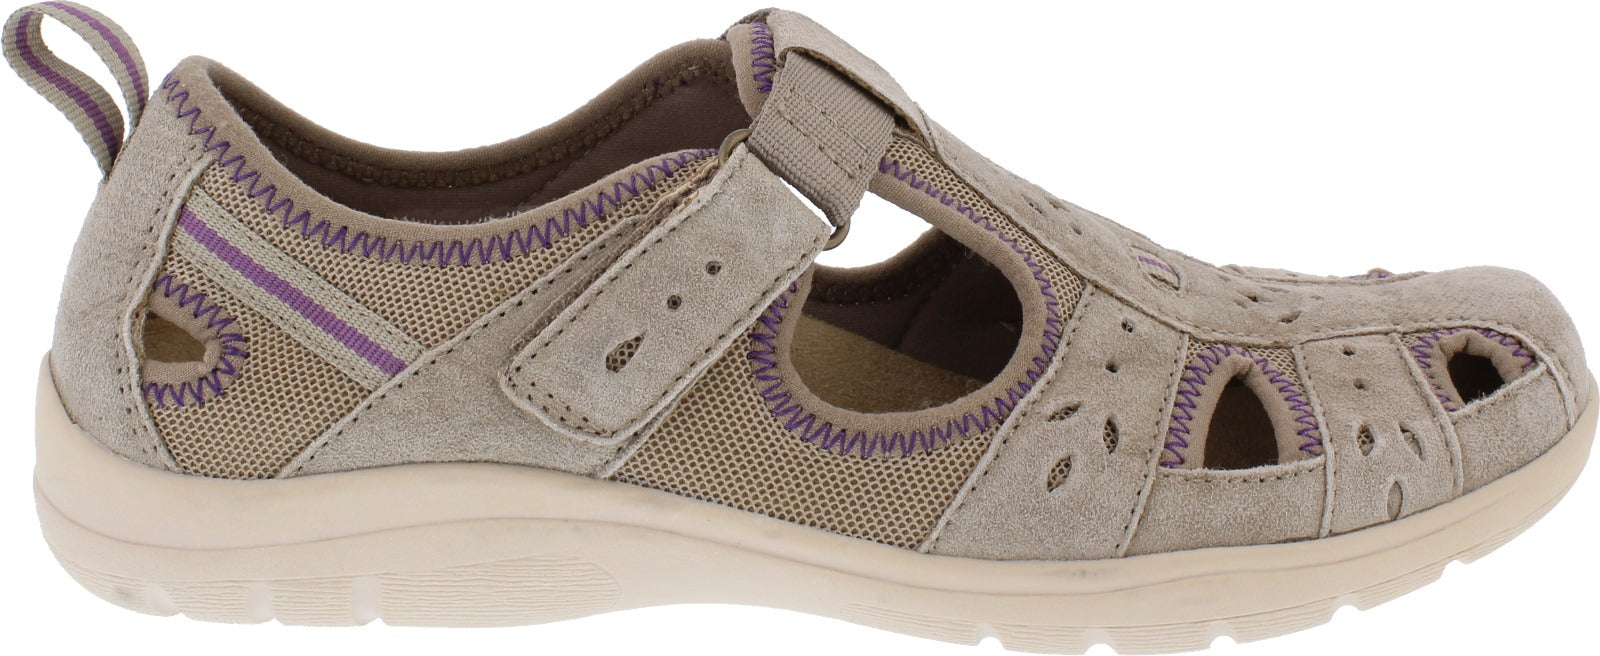 Free Spirit Cleveland Ladies New Khaki Suede & Textile Touch Fastening Shoes